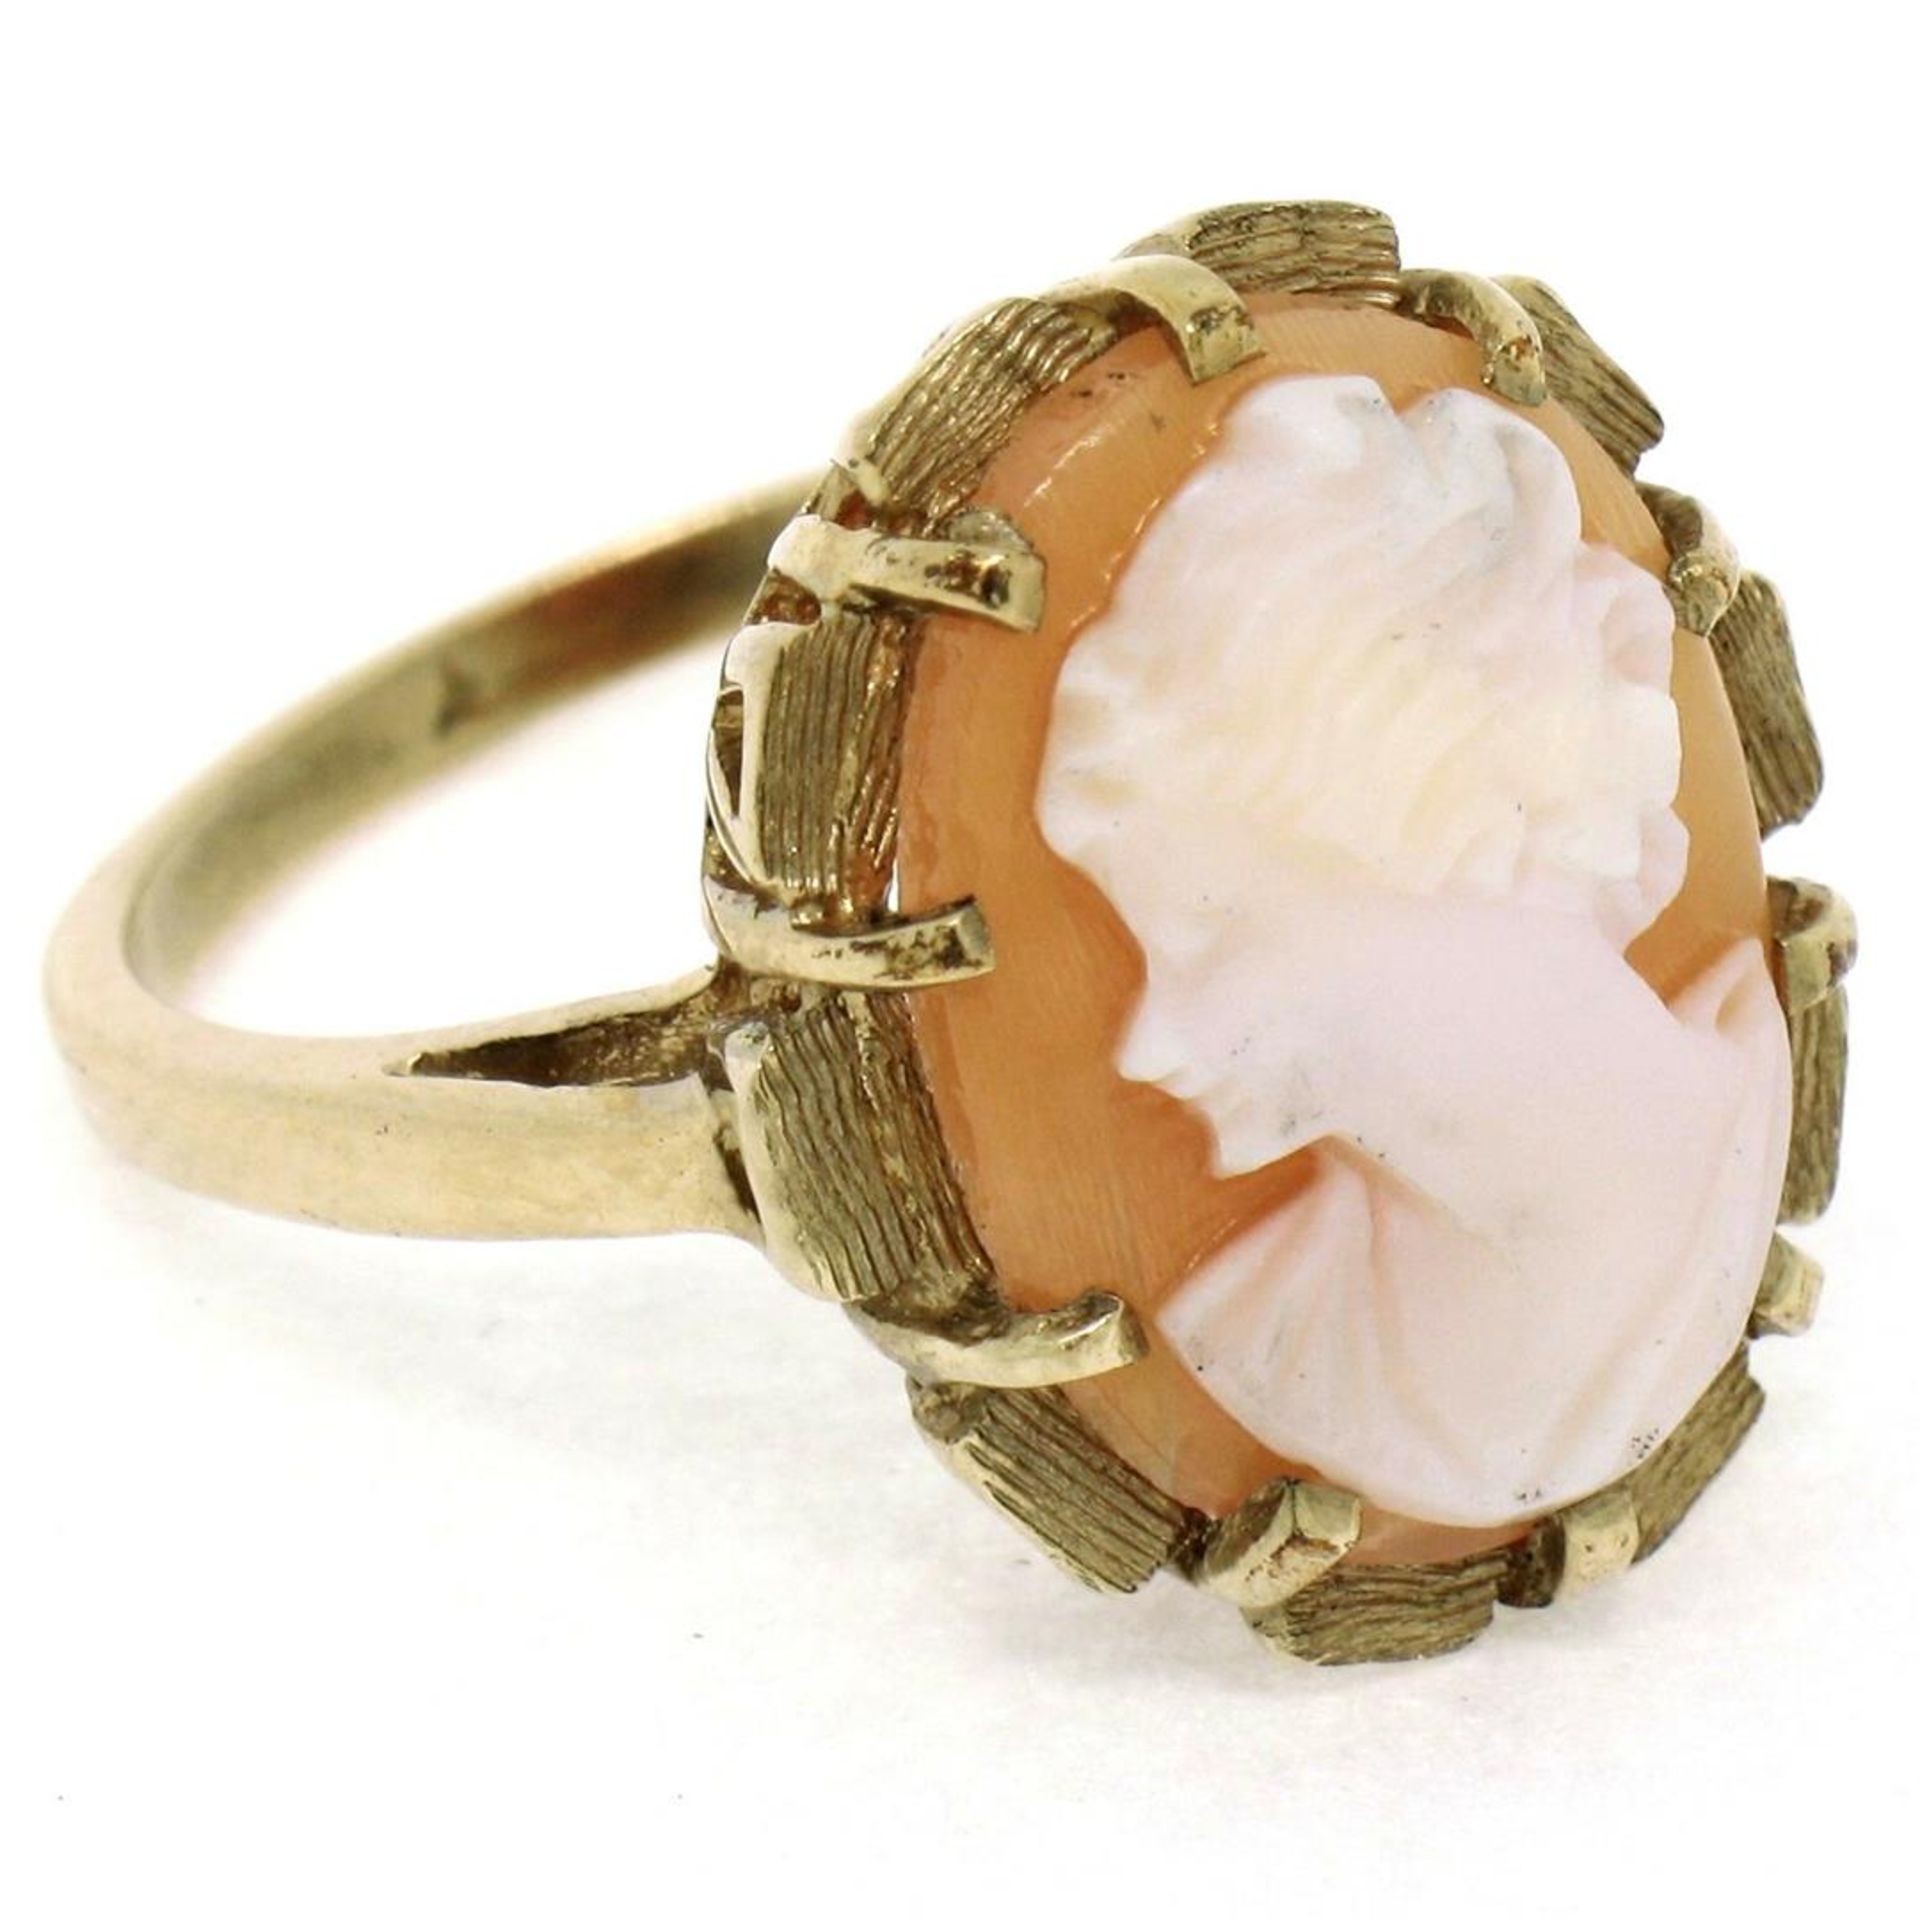 Vintage 14k Yellow Gold Oval Carved Shell Cameo Ring w/ Brushed Finish Frame - Image 7 of 8